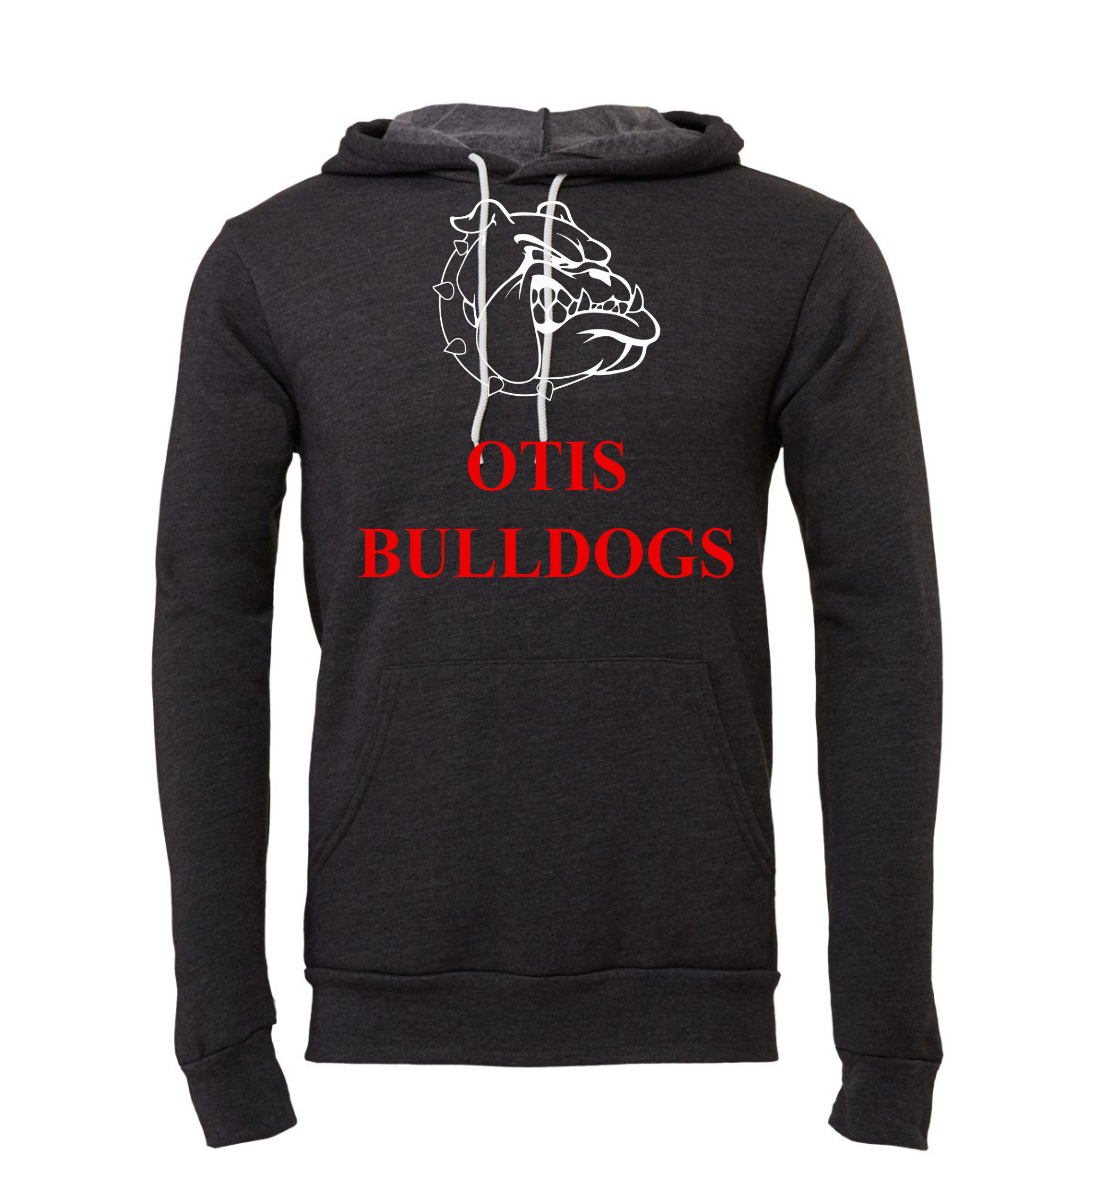 otis bulldogs hoodie - unisex - elevate your spirit with two designs!